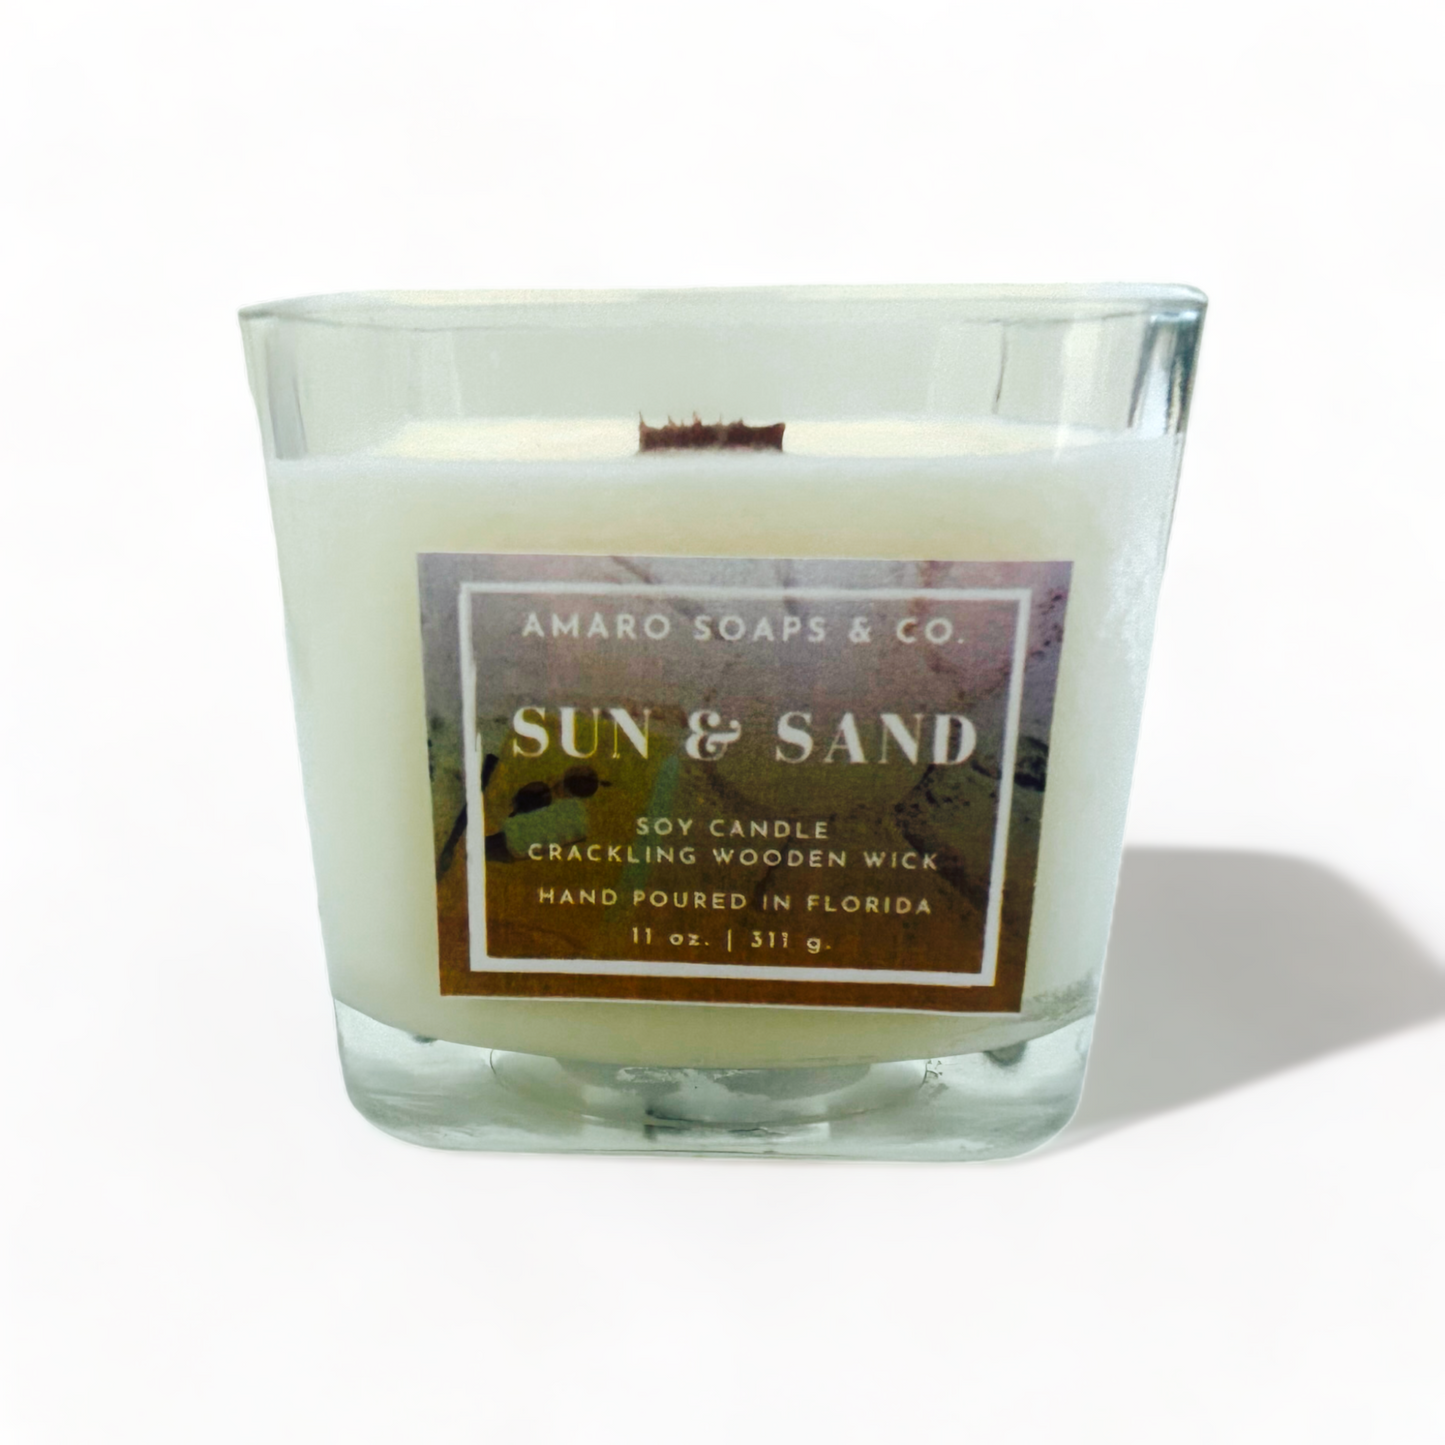 Sun & Sand Wooden Wick Soy Candle